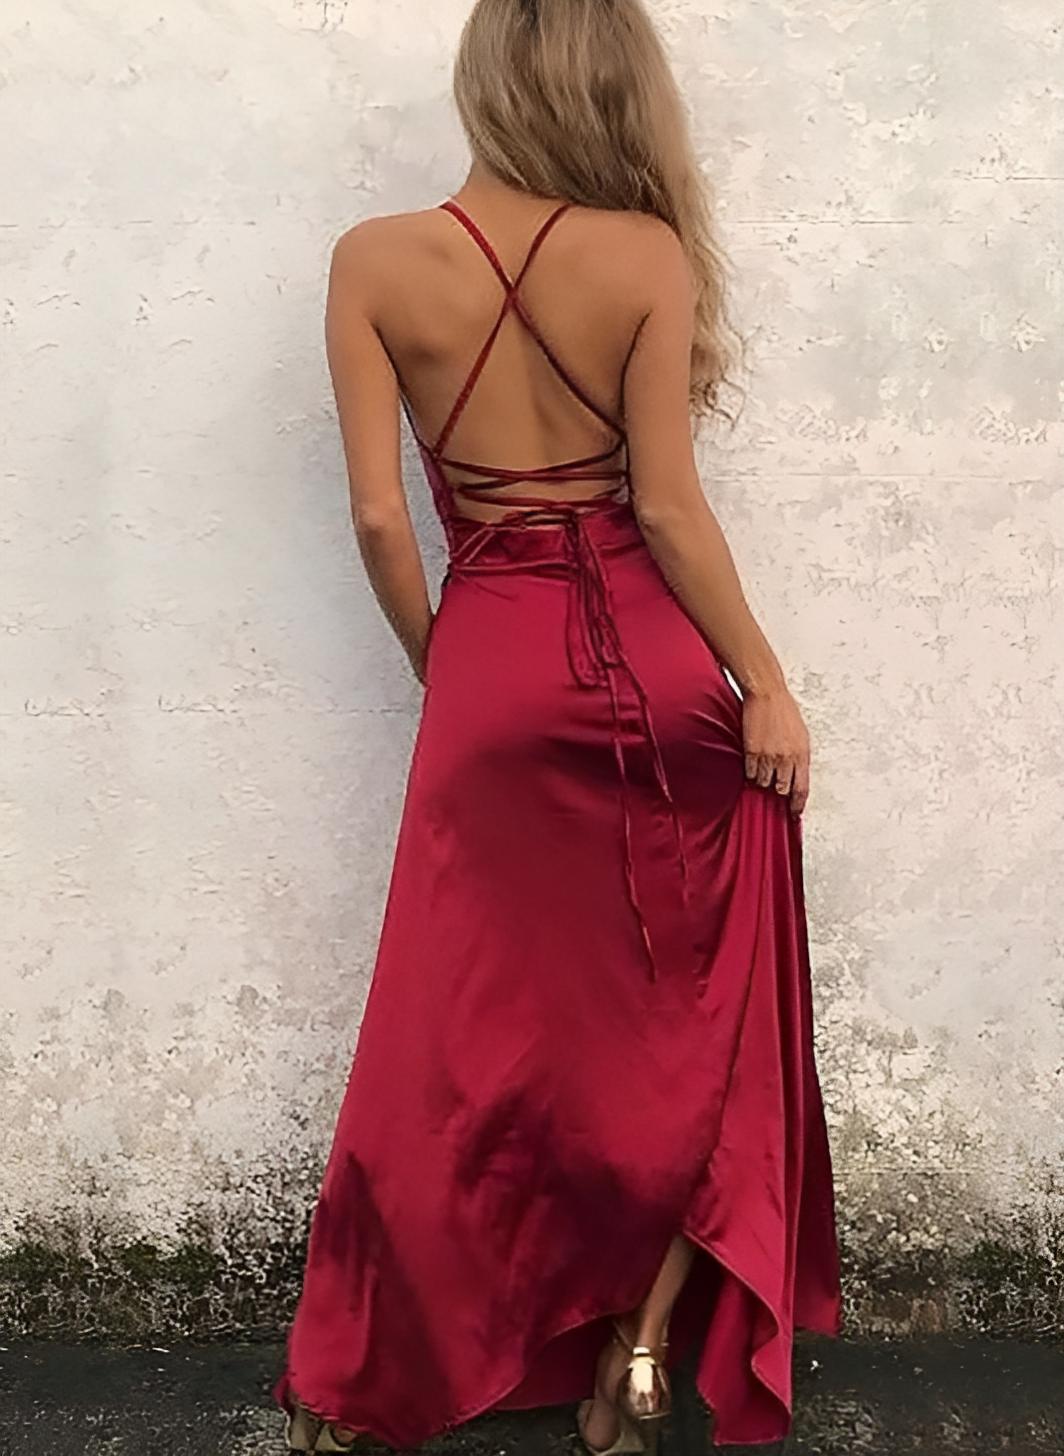 A-Line Cowl Neck Open Back Burgundy Prom Dresses With Satin